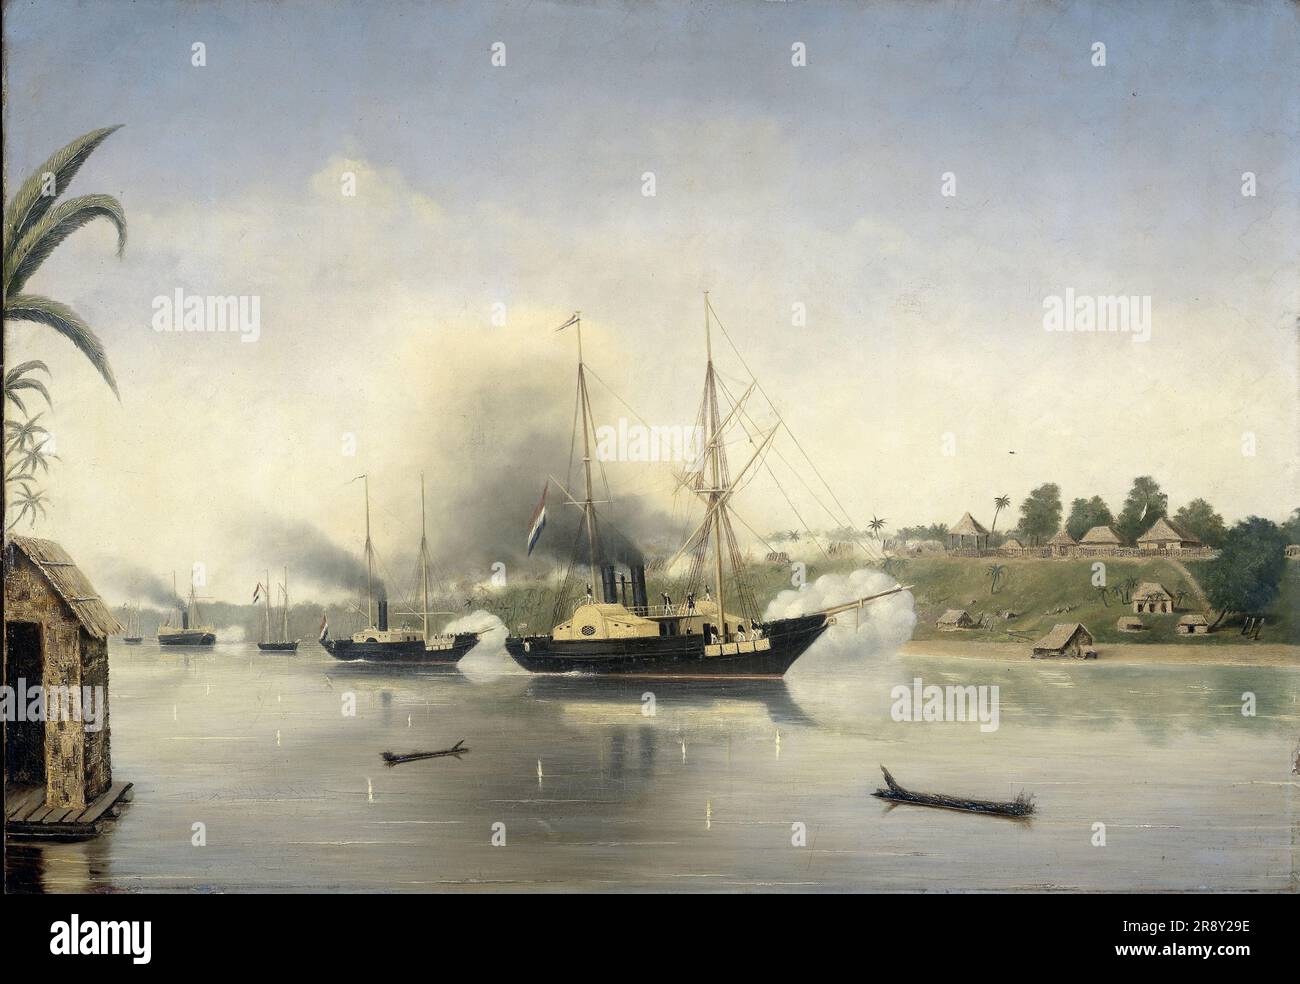 The shelling of the Sultan of Jambi's Kraton (Palace) by the government naval vessels 'Celebes', 'Admiraal van Kinsbergen' and 'Onrust' on 8 September 1858, 1858-1865. The Sultanate of Jambi (Djambi in Dutch) in northern Sumatra, was annexed by the Dutch during the 19th century. Stock Photo